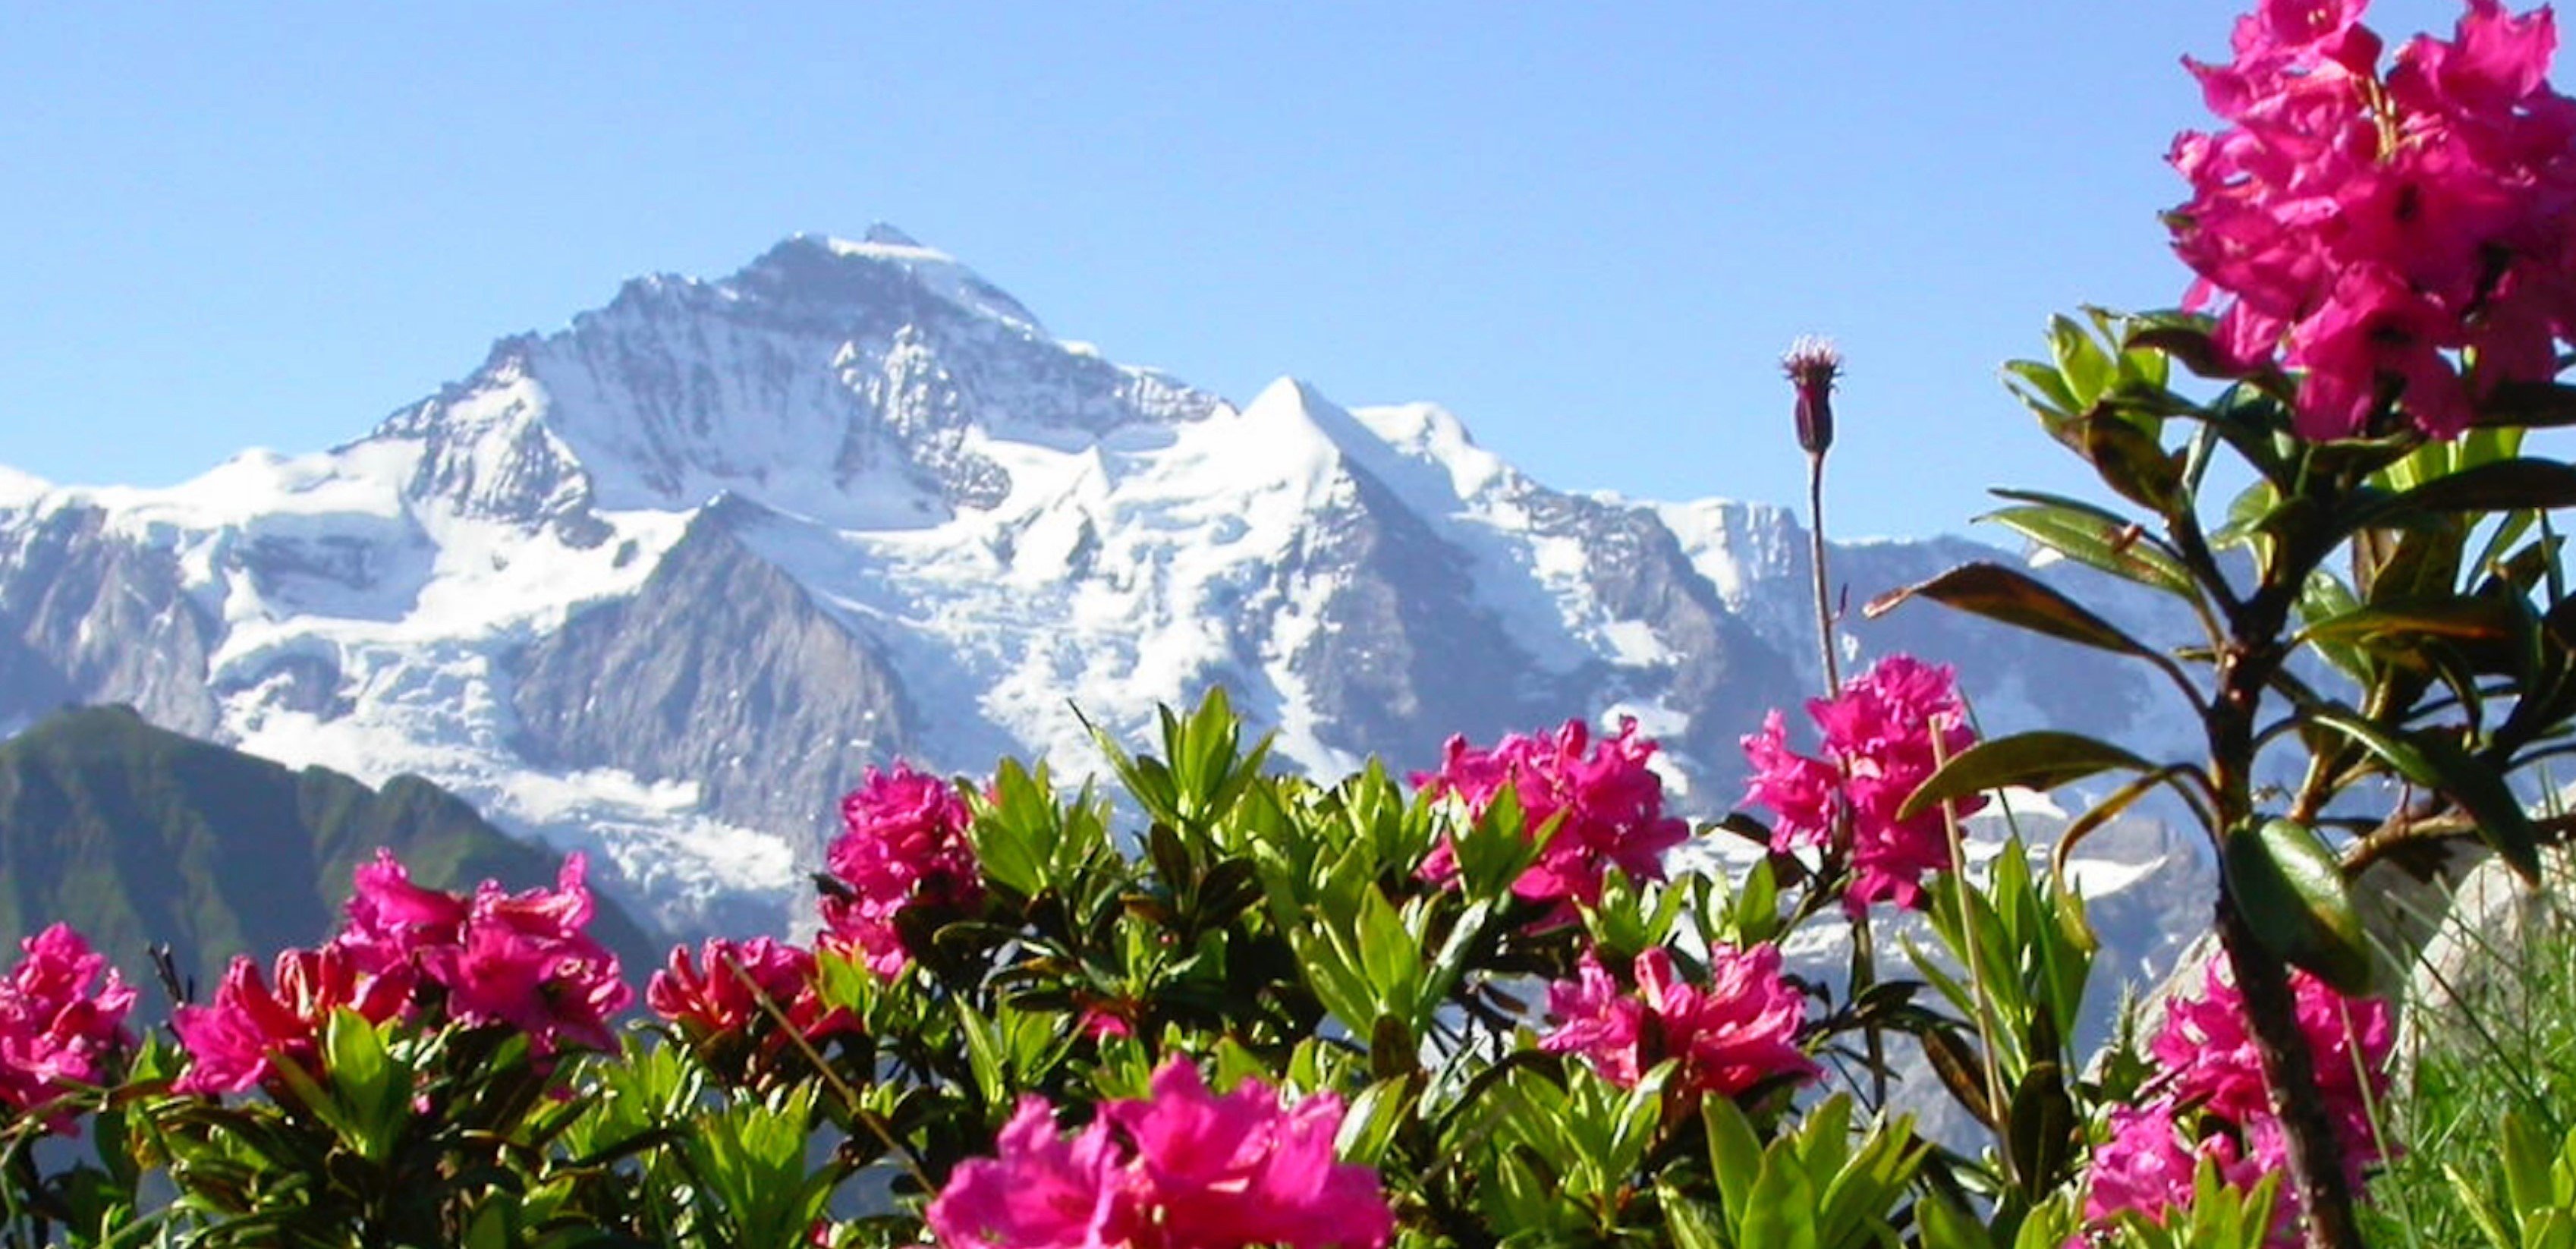 Alpenrose flowers with Swiss mountains in the background